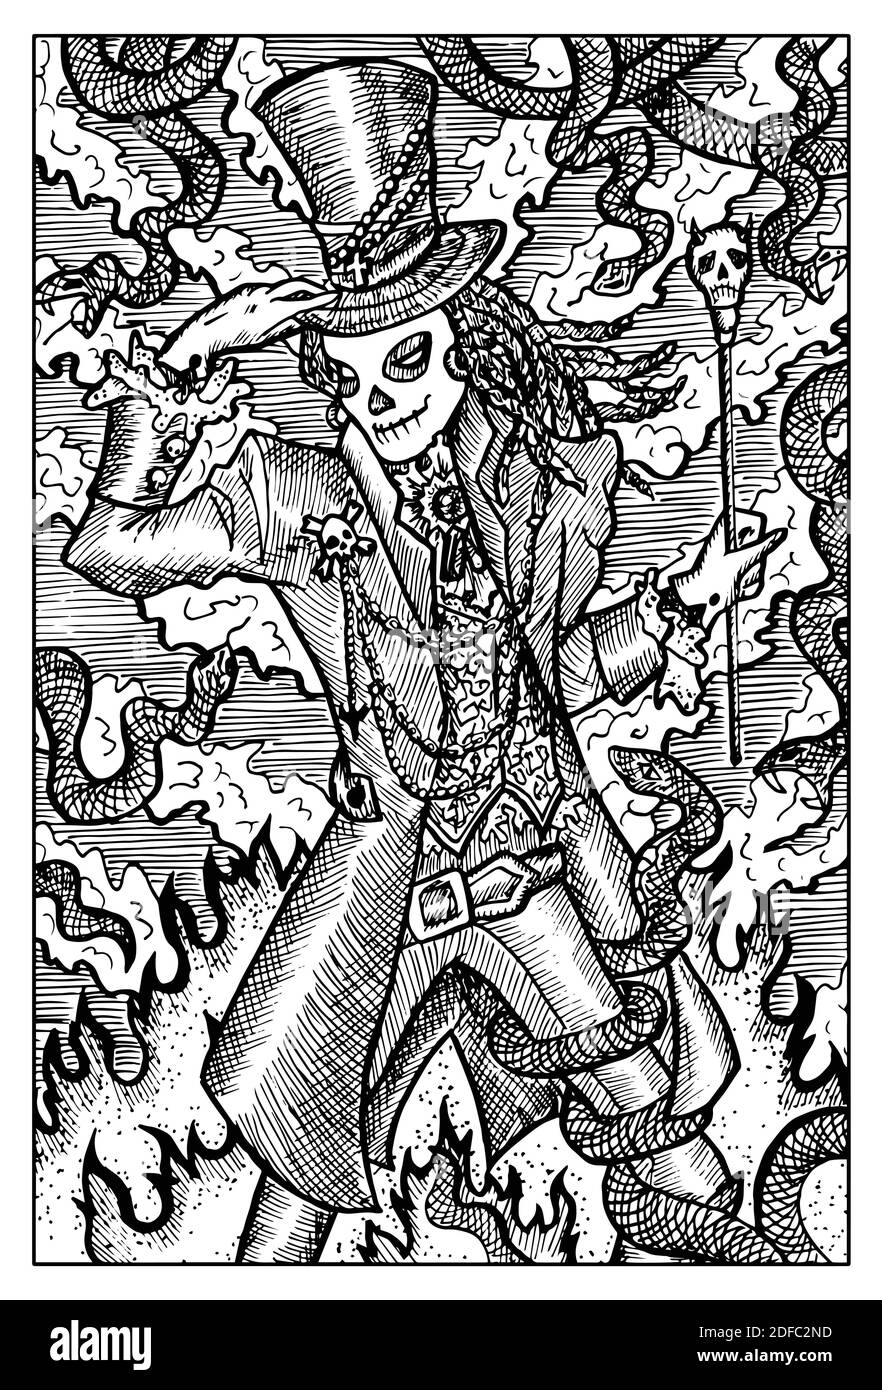 Baron Samedi. Engraved black and white Fantasy illustration with mythological creatures and characters Stock Vector